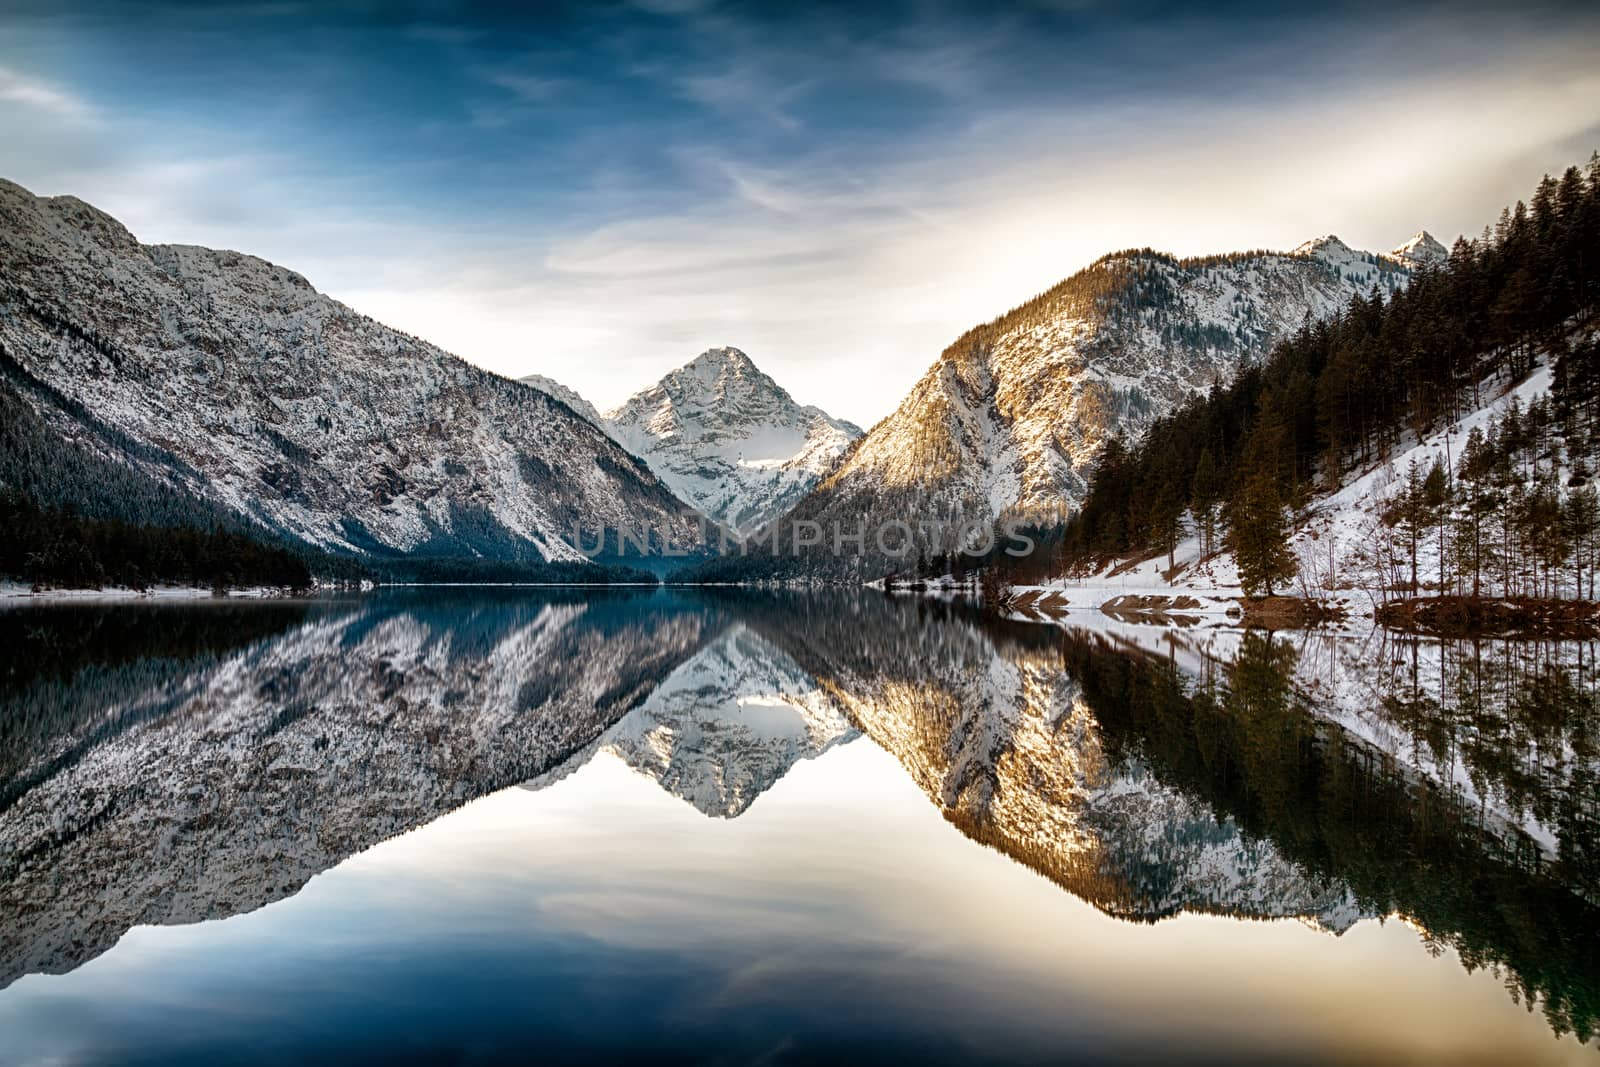 Reflection at Plansee (Plan Lake), Alps, Austria by fisfra